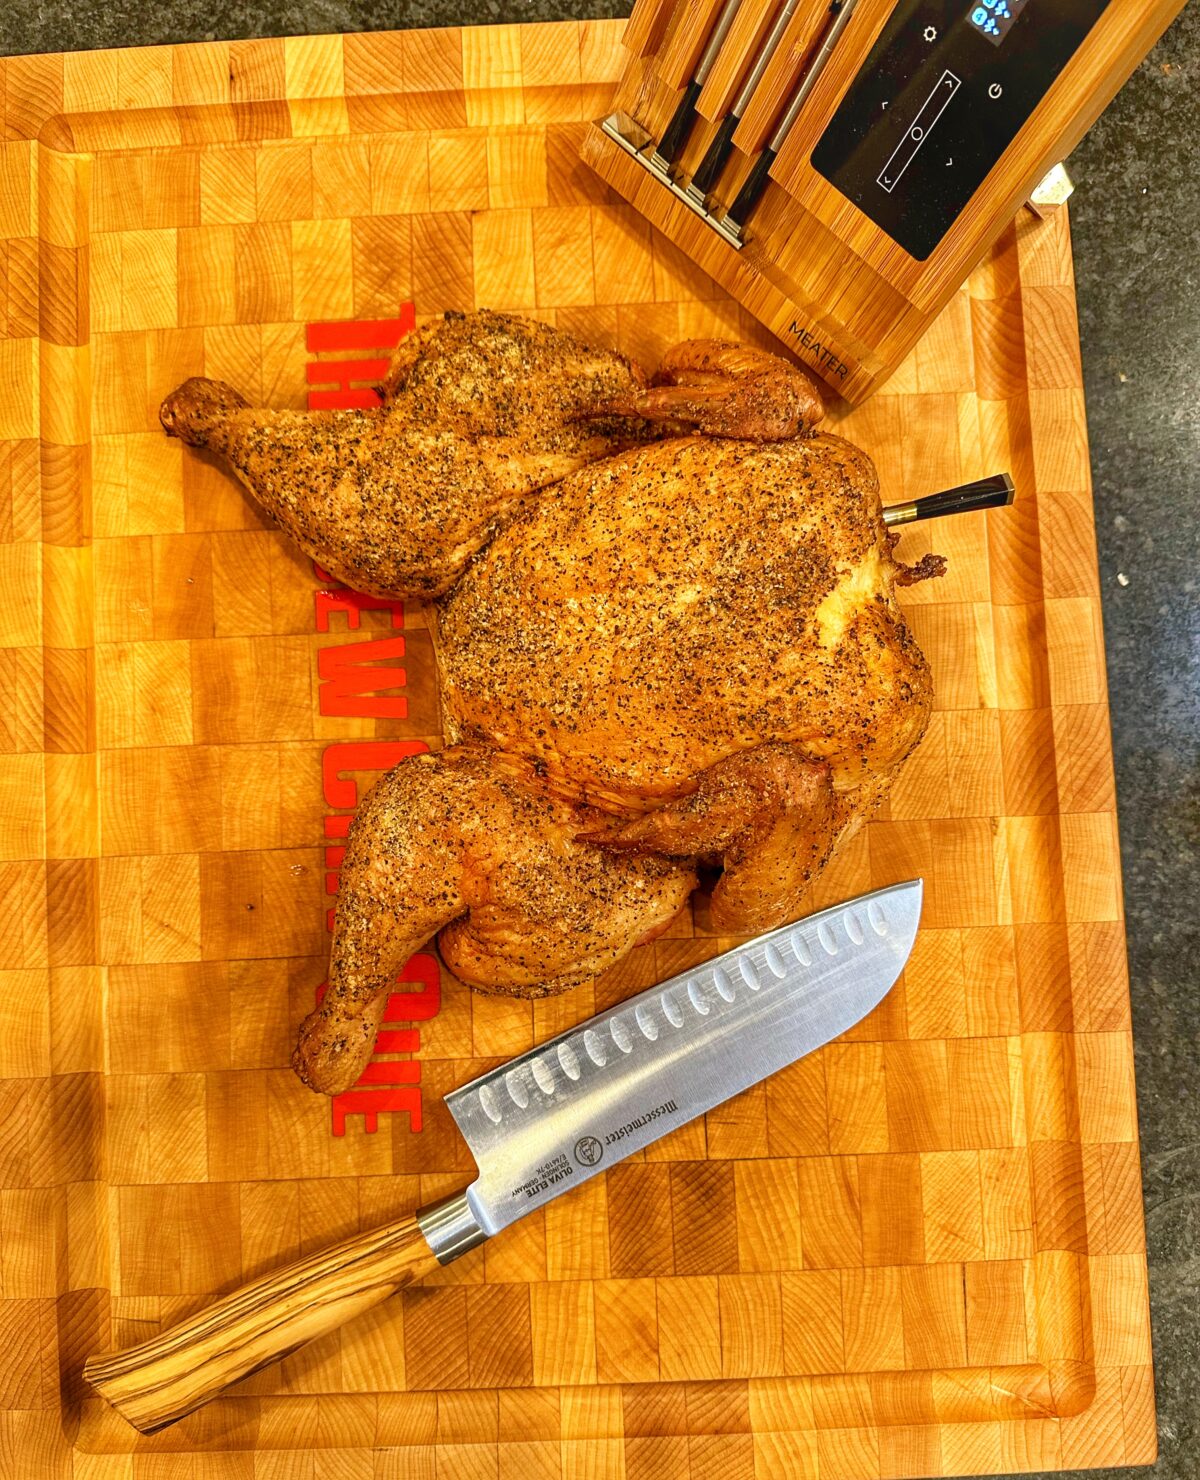 Cooked chicken on a cutting board.